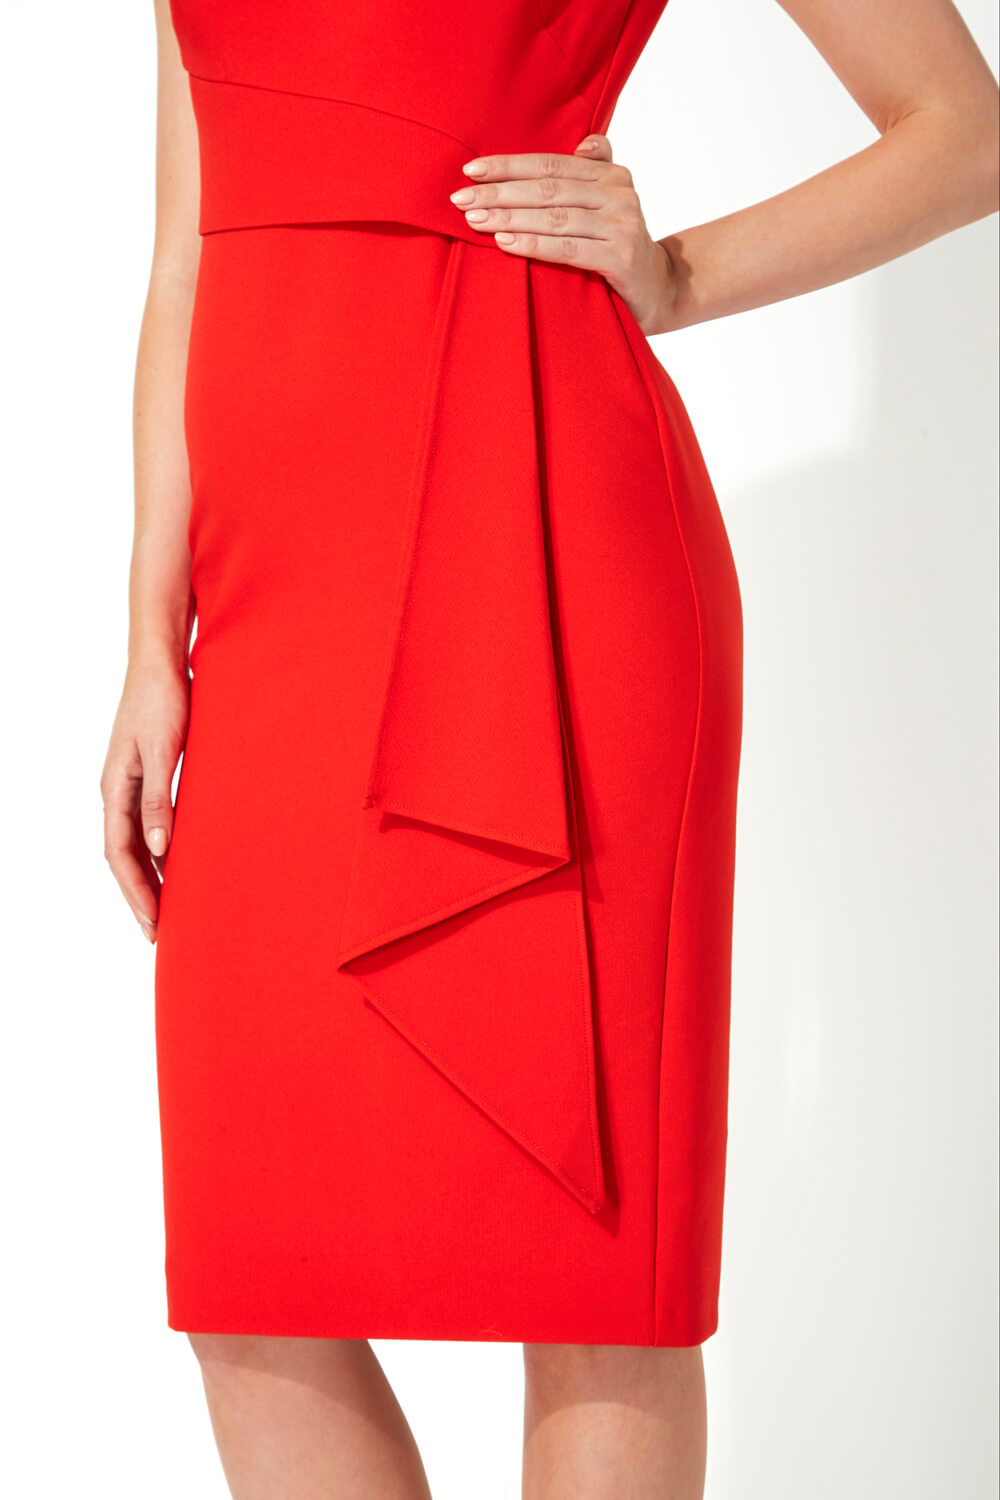 Red Ruched Waist Cocktail Dress, Image 4 of 5